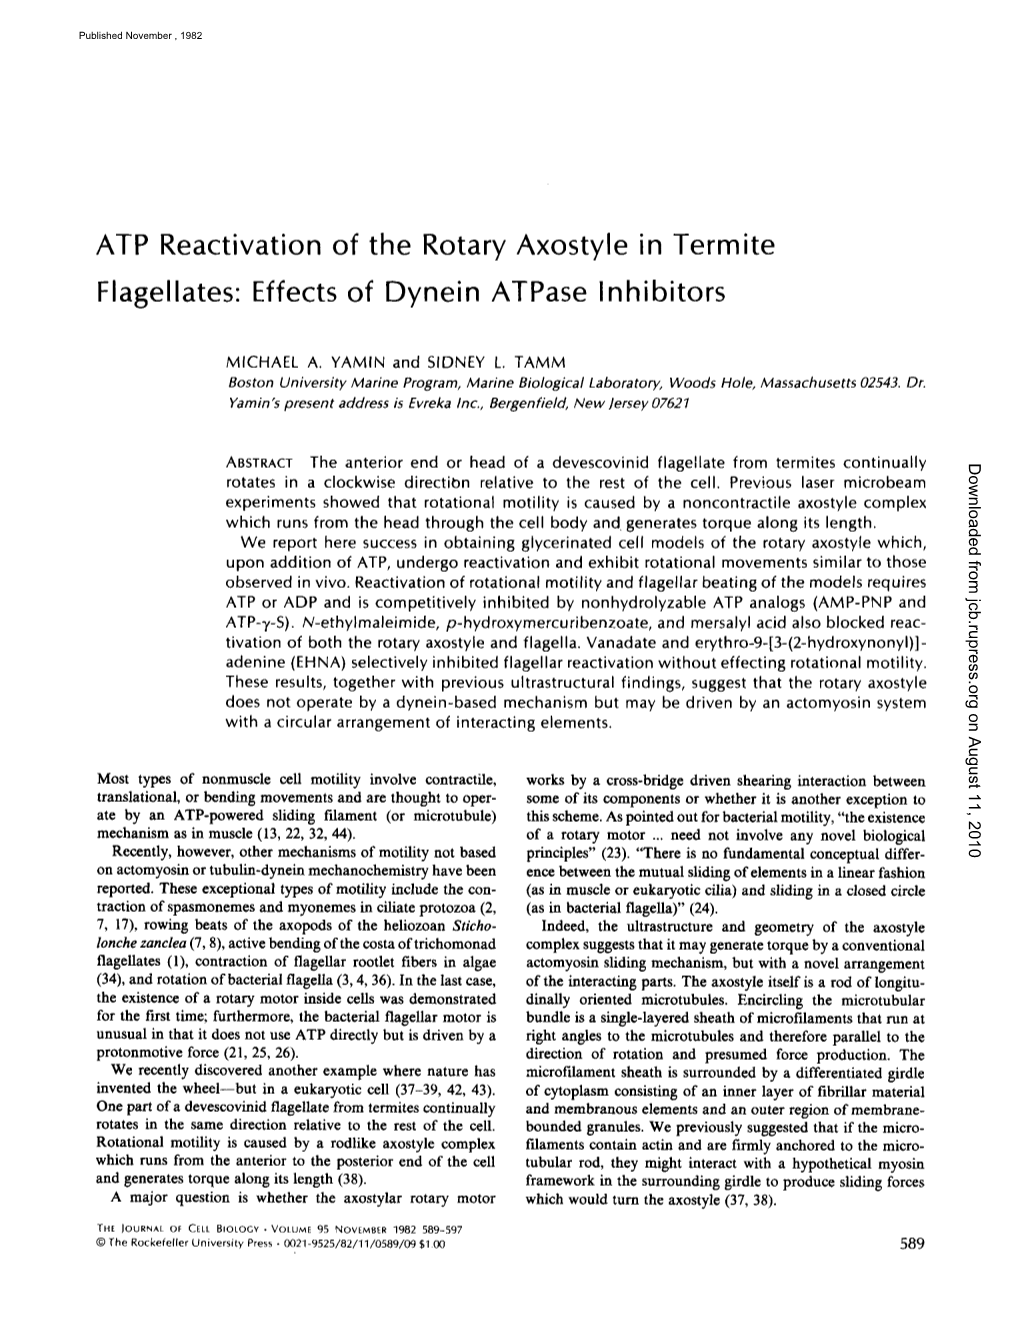 ATP Reactivation of the Rotary Axostyle in Termite Flagellates: Effects of Dynein Atpase Inhibitors